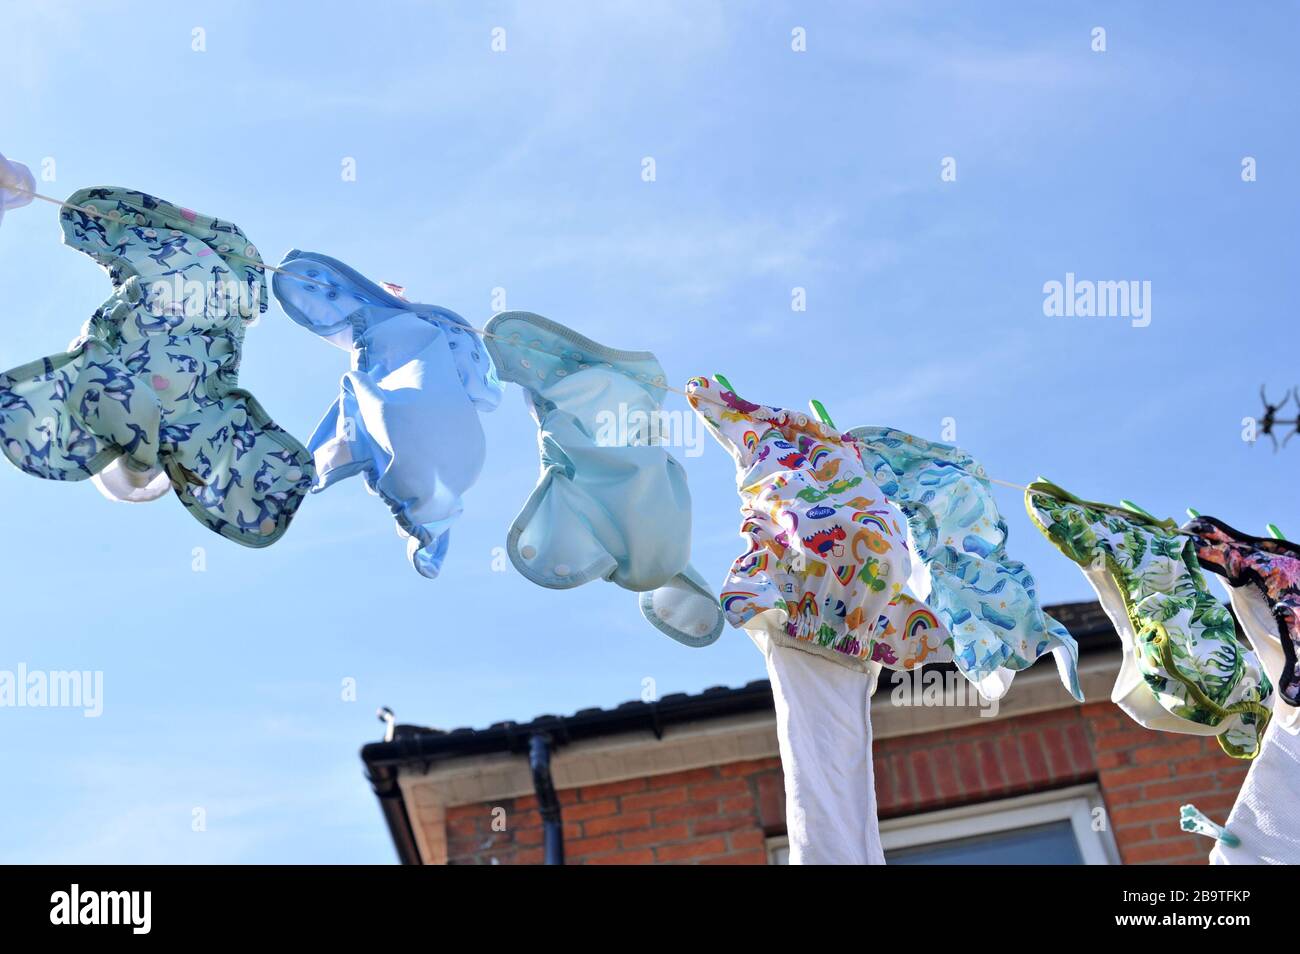 Southampton, U.K. , 24 Mar, 2020. A variety of different styles and themes of cloth nappies hanging out to dry on a washing line in sunny weather. Stock Photo